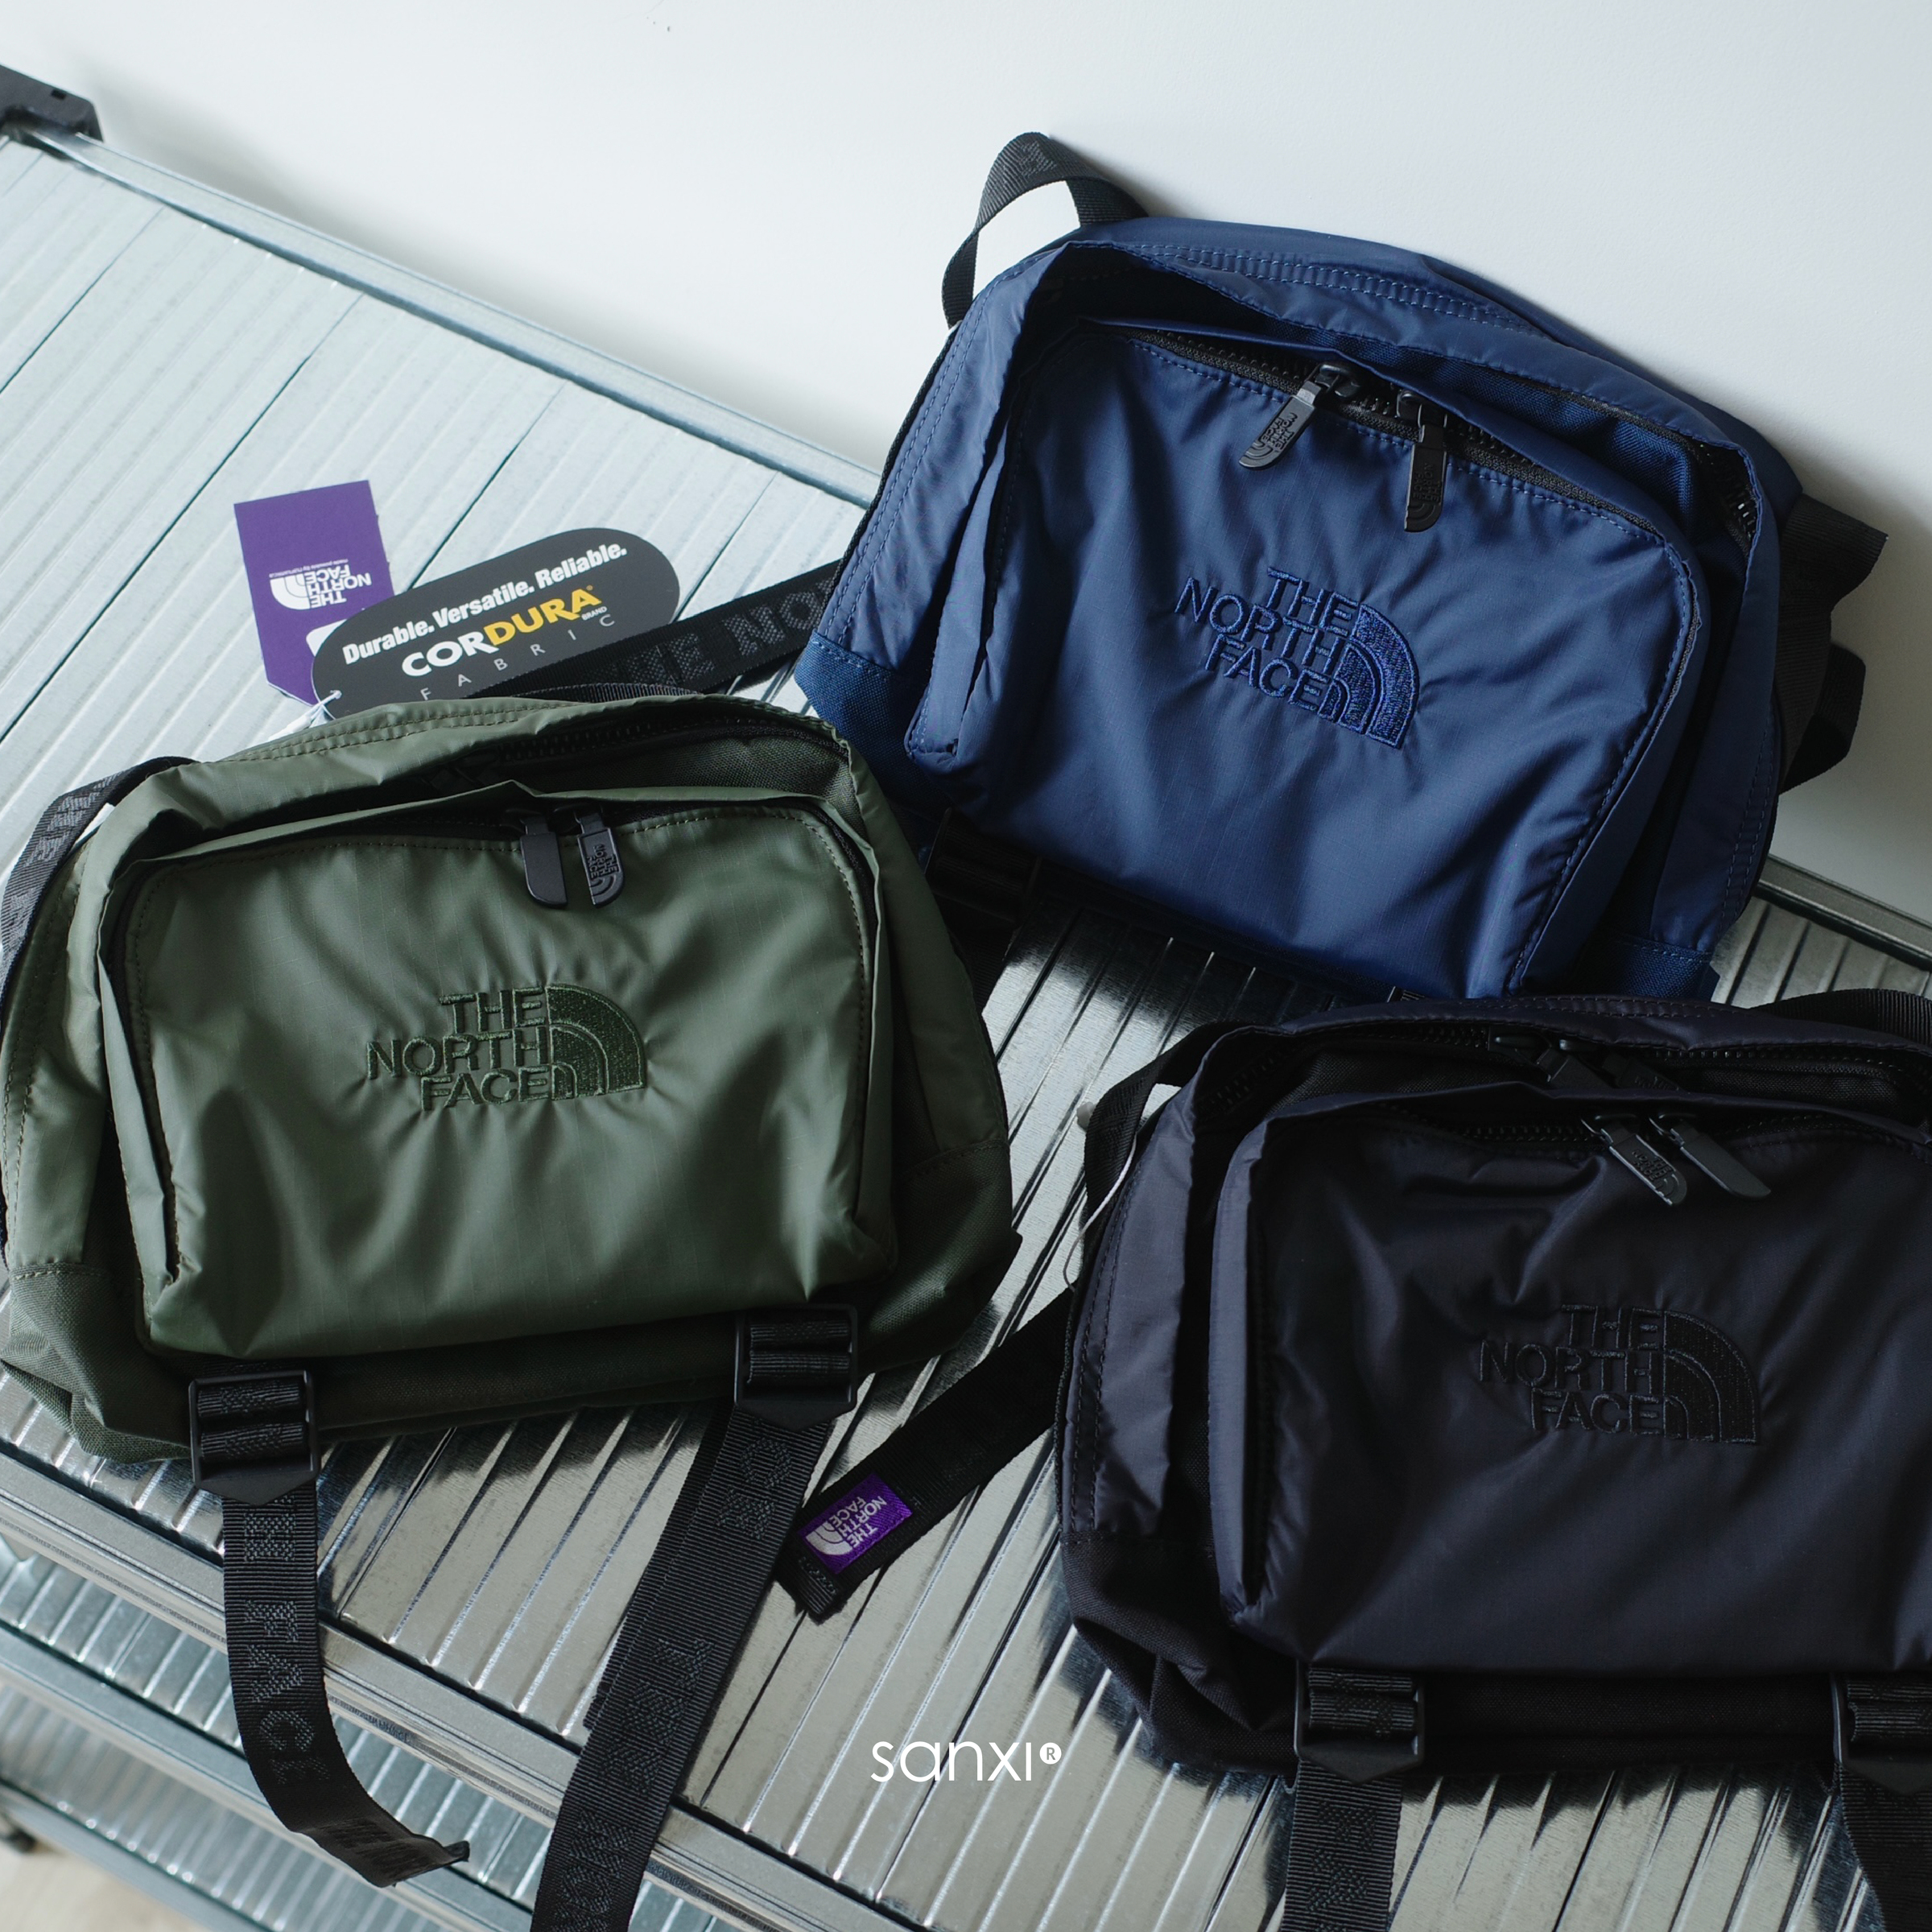 23SS THE NORTH FACE PURPLE LABEL Shoulder Bag 紫標小方包 (3色)